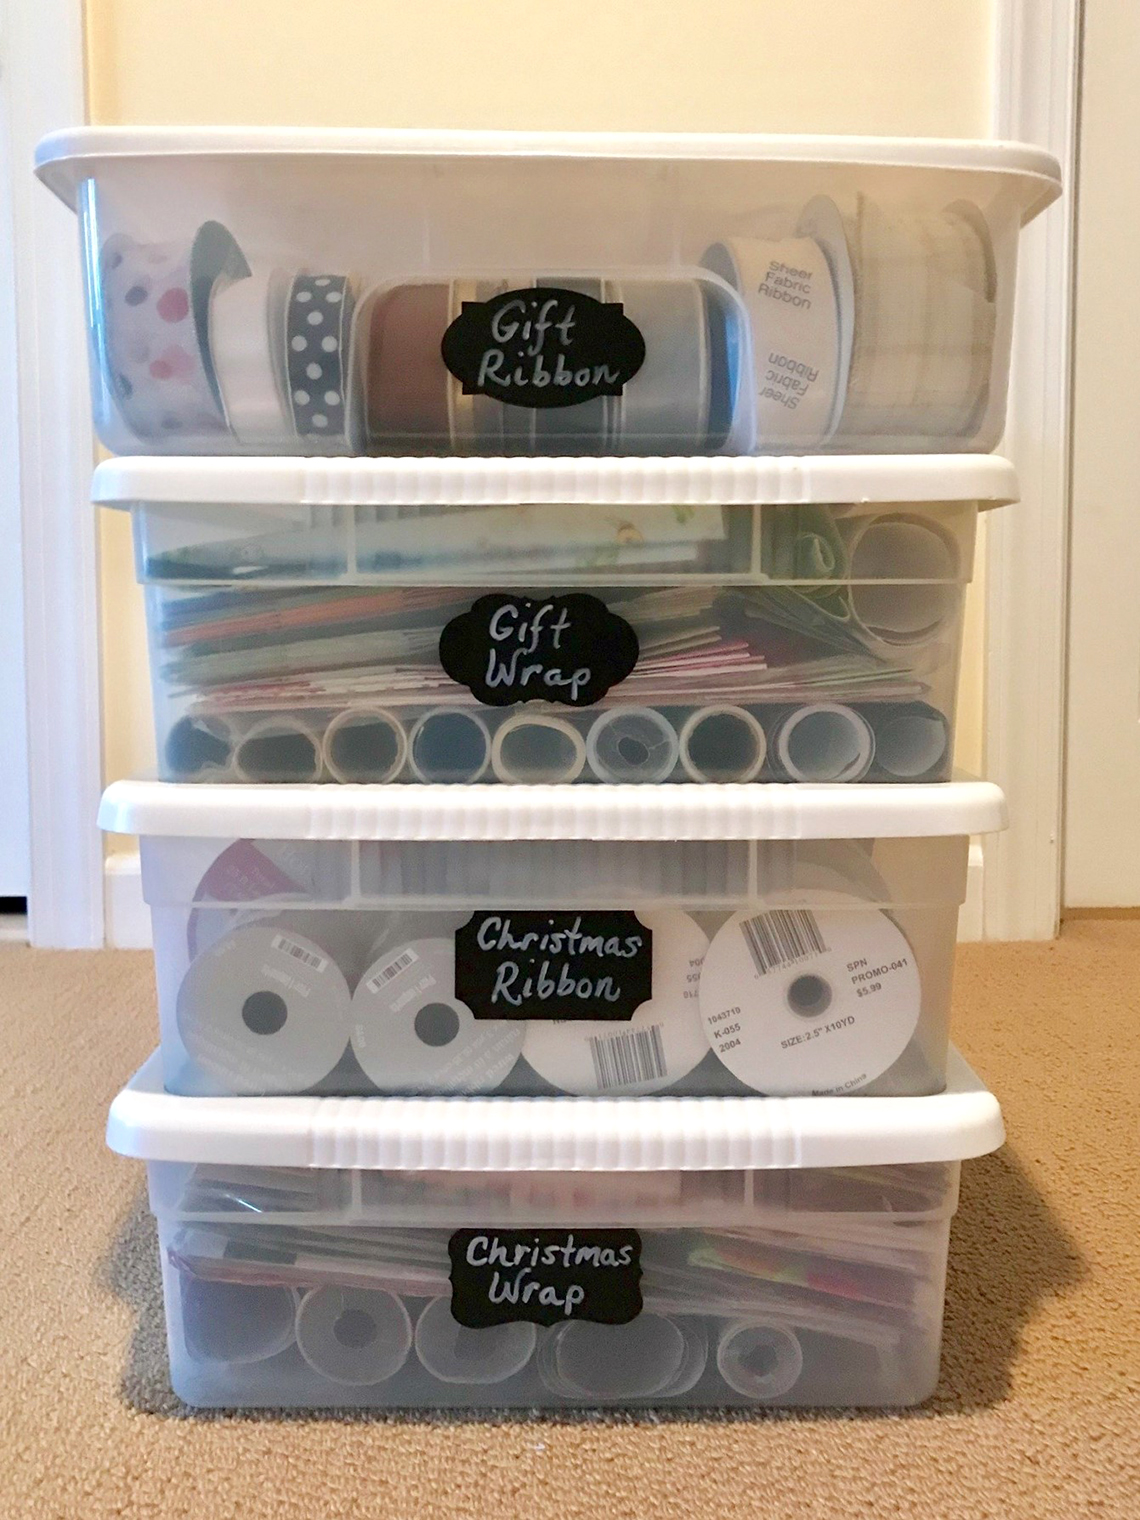 gift wrap supplies are organized in clear plastic storage bins